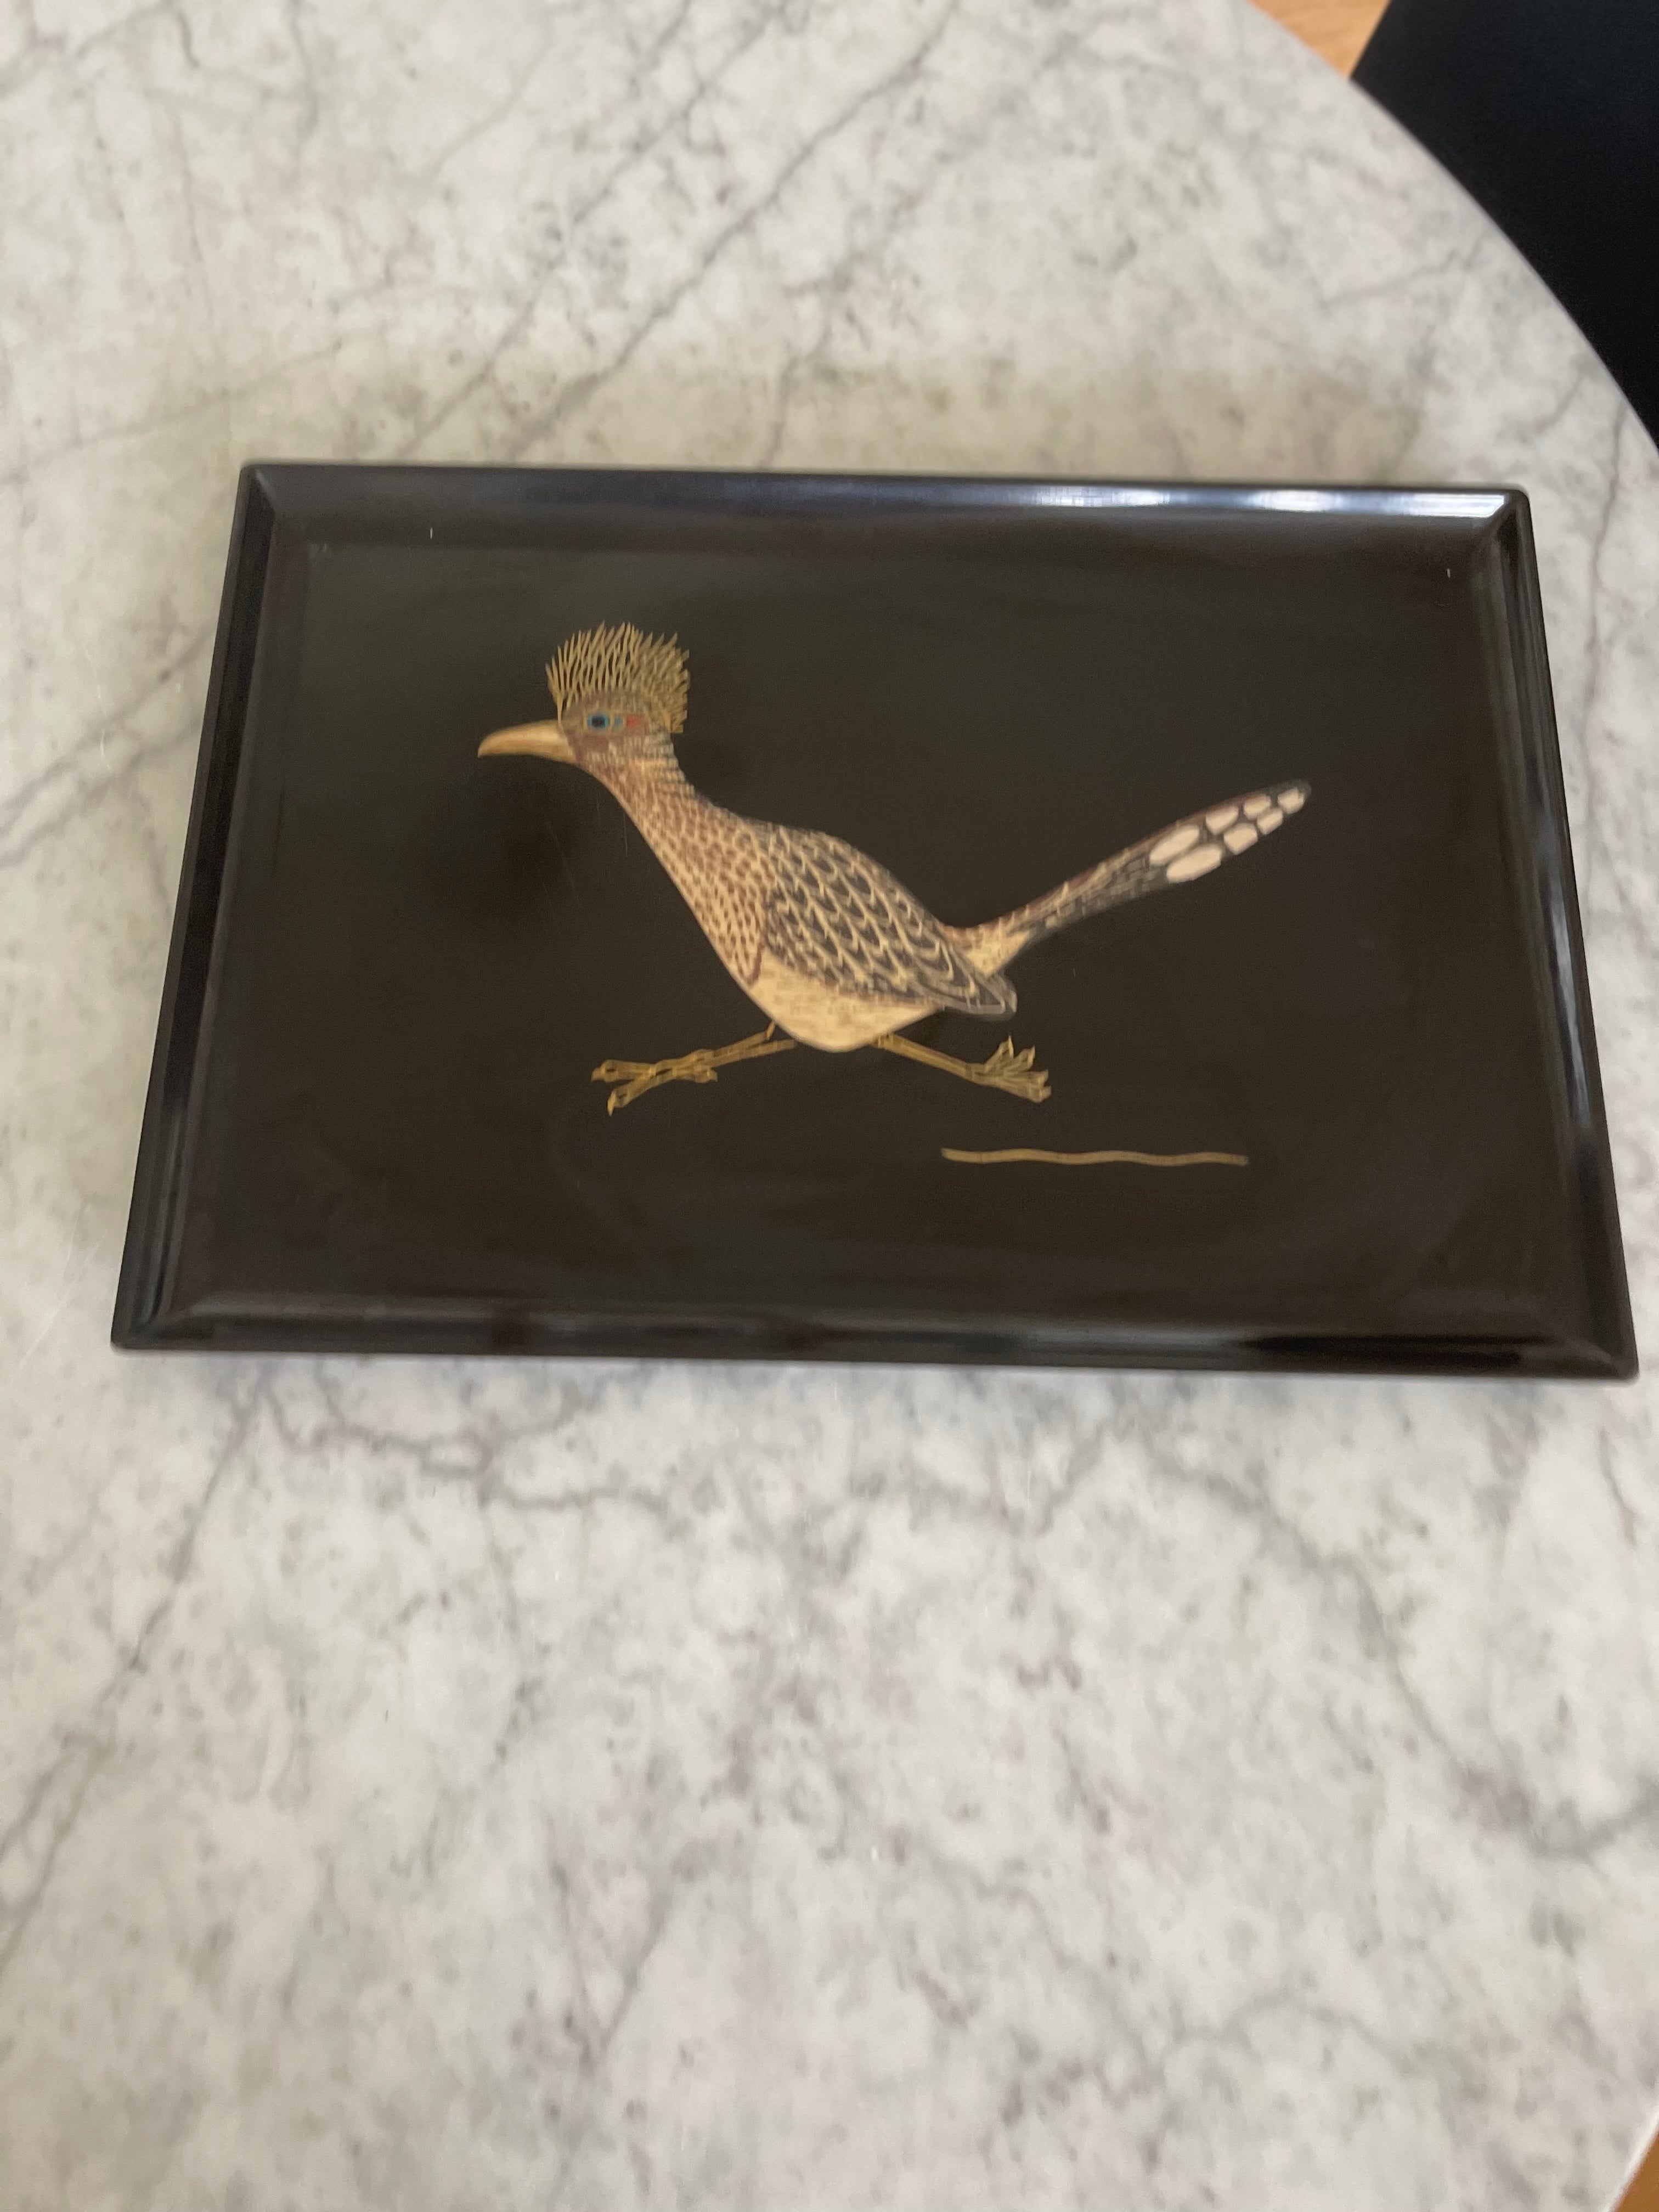 Roadrunner Serving Tray 18” x 12” by Couroc